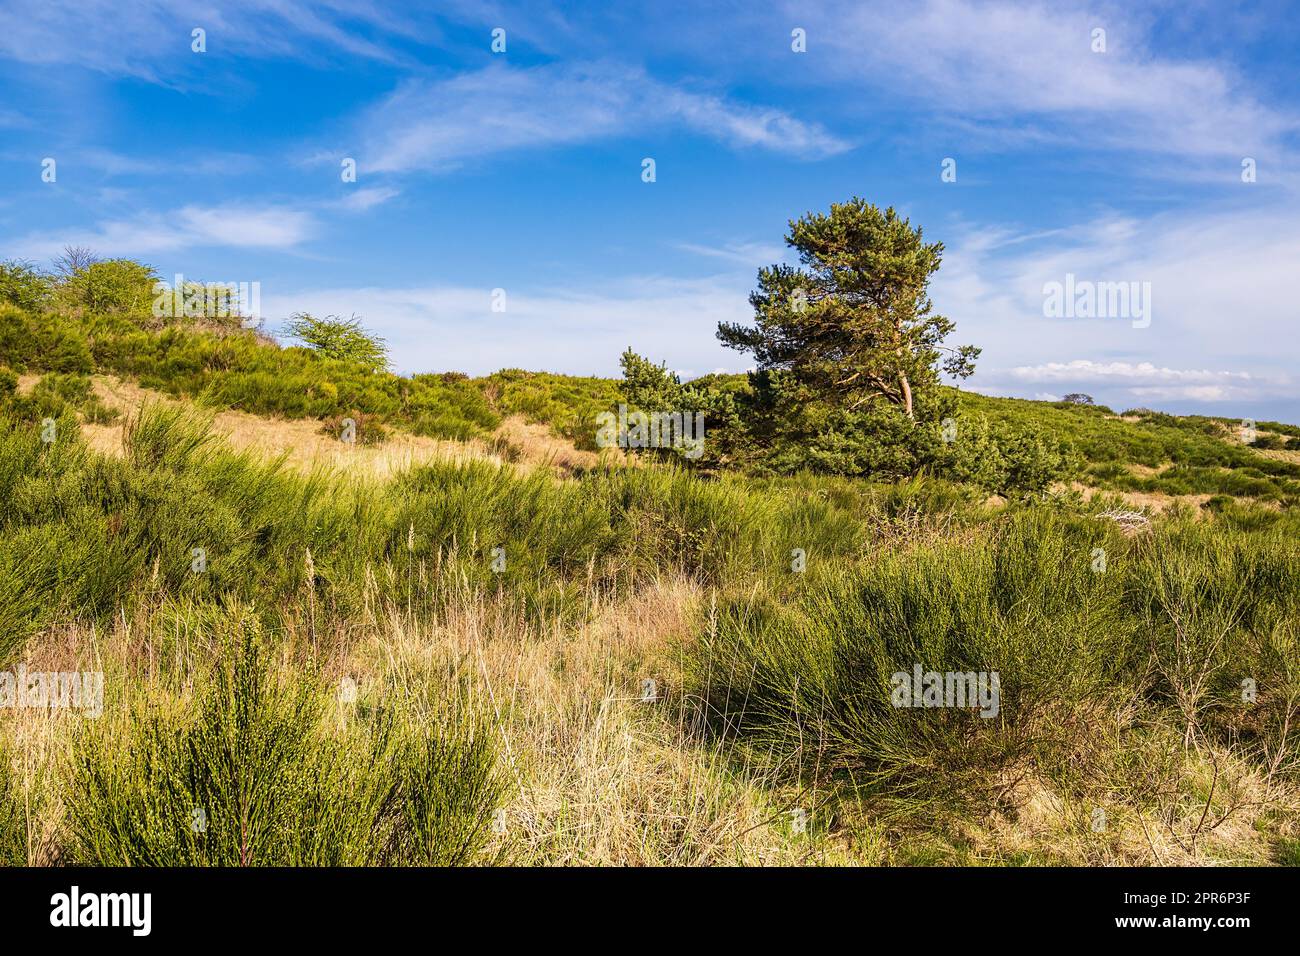 Landscape with tree on the island Hiddensee, Germany Stock Photo